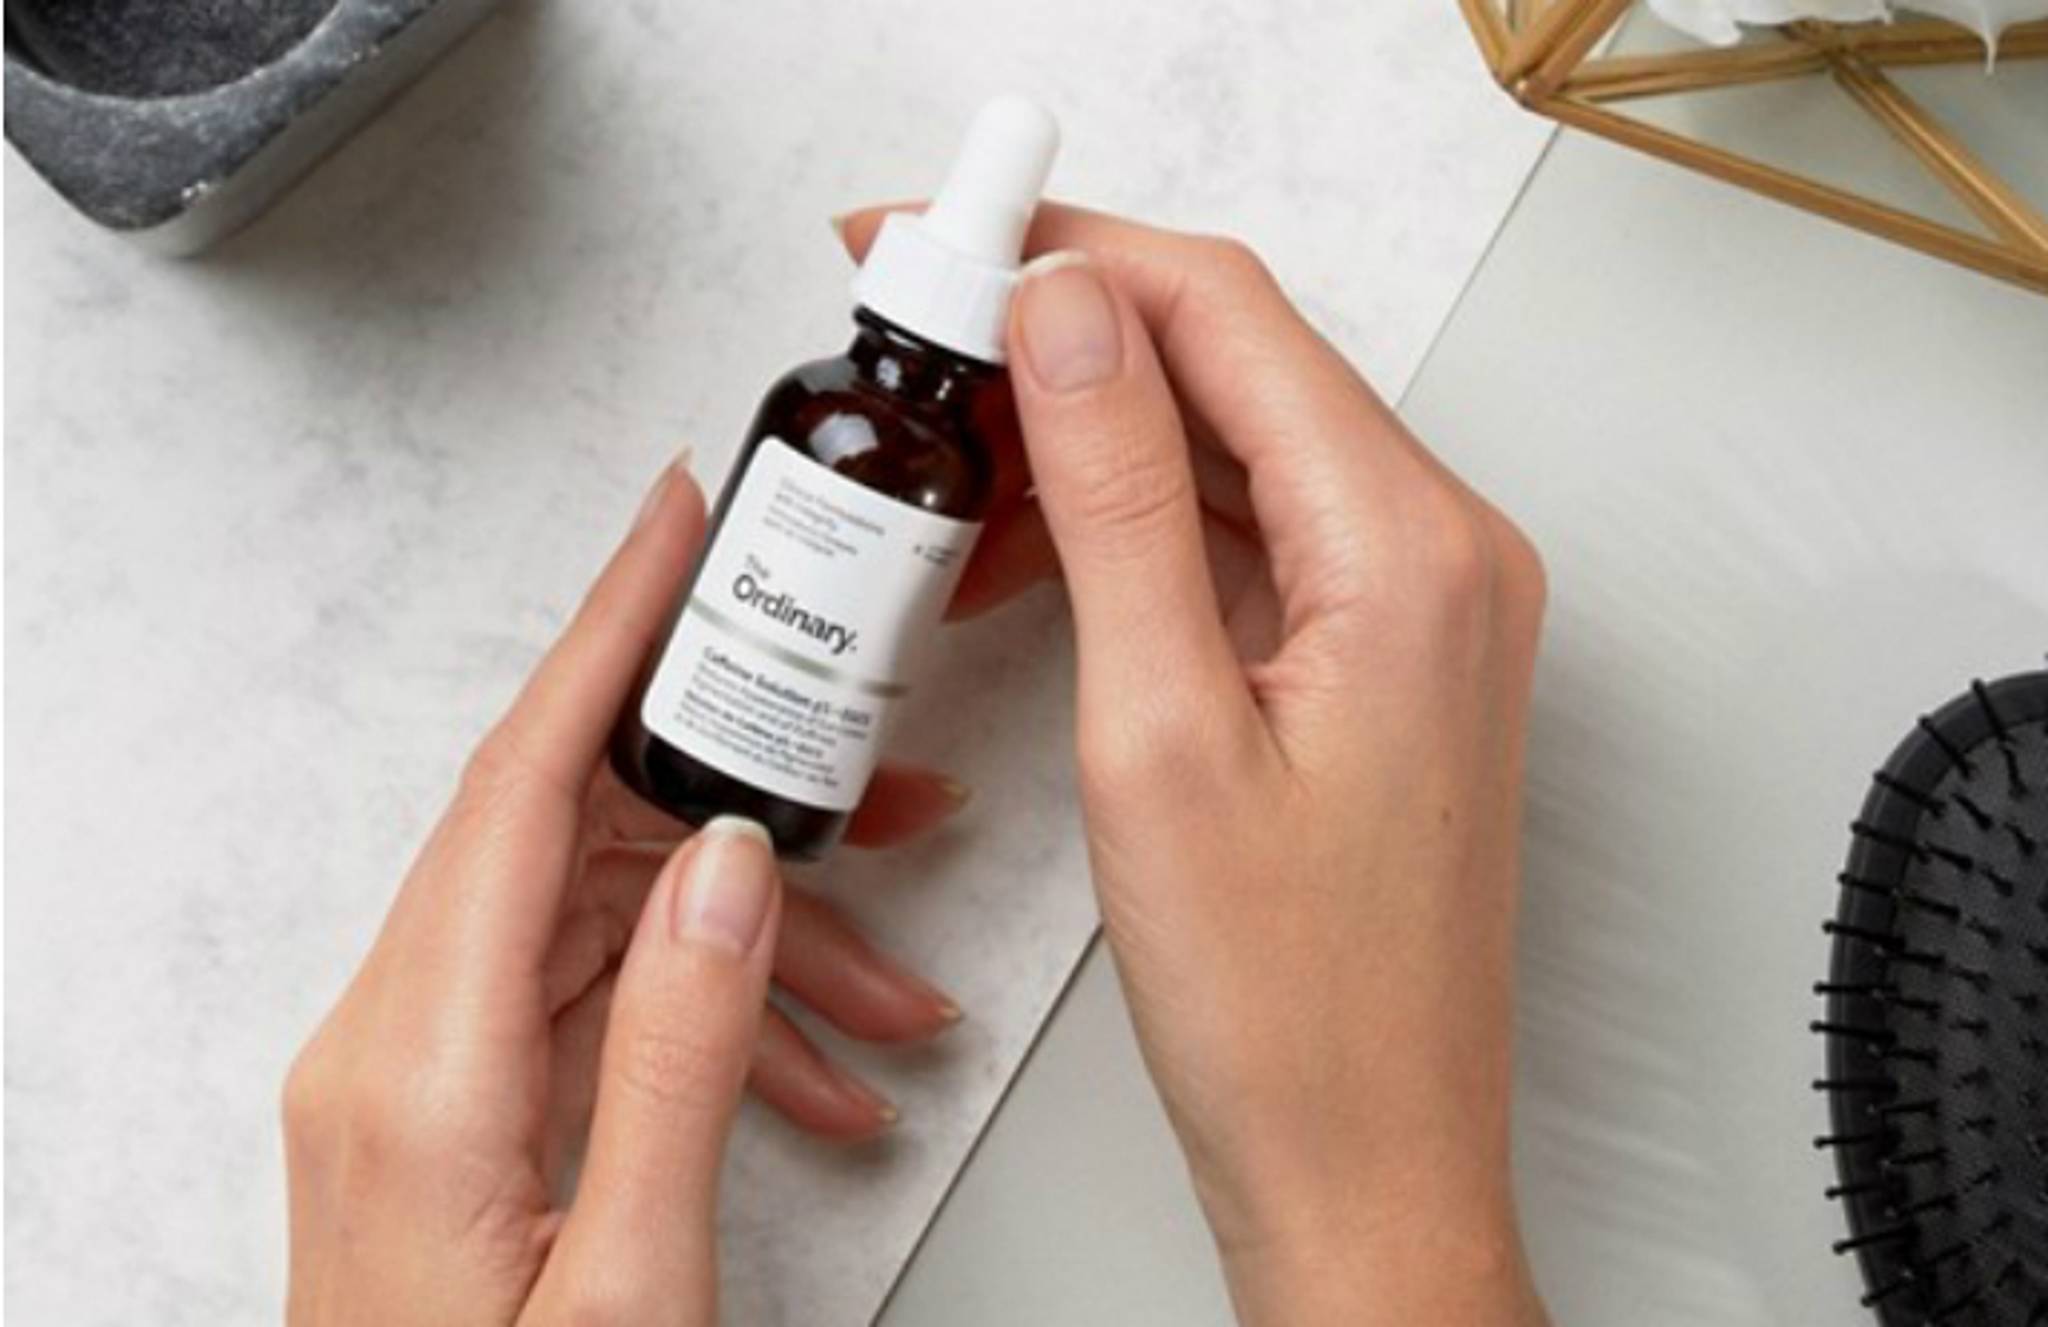 The Ordinary brings clinical skincare to the high street